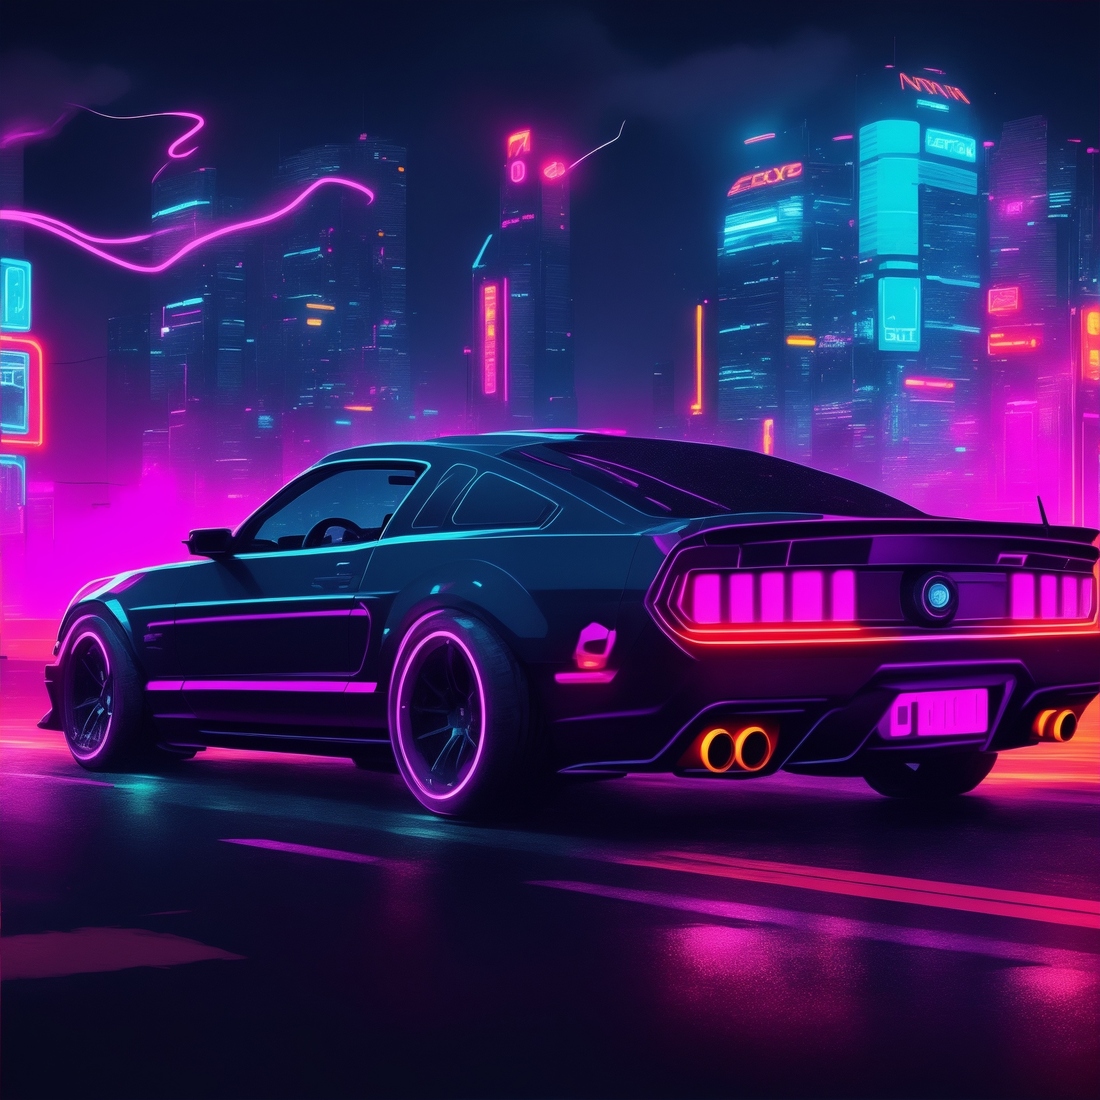 CyberCar By Jeremy cover image.